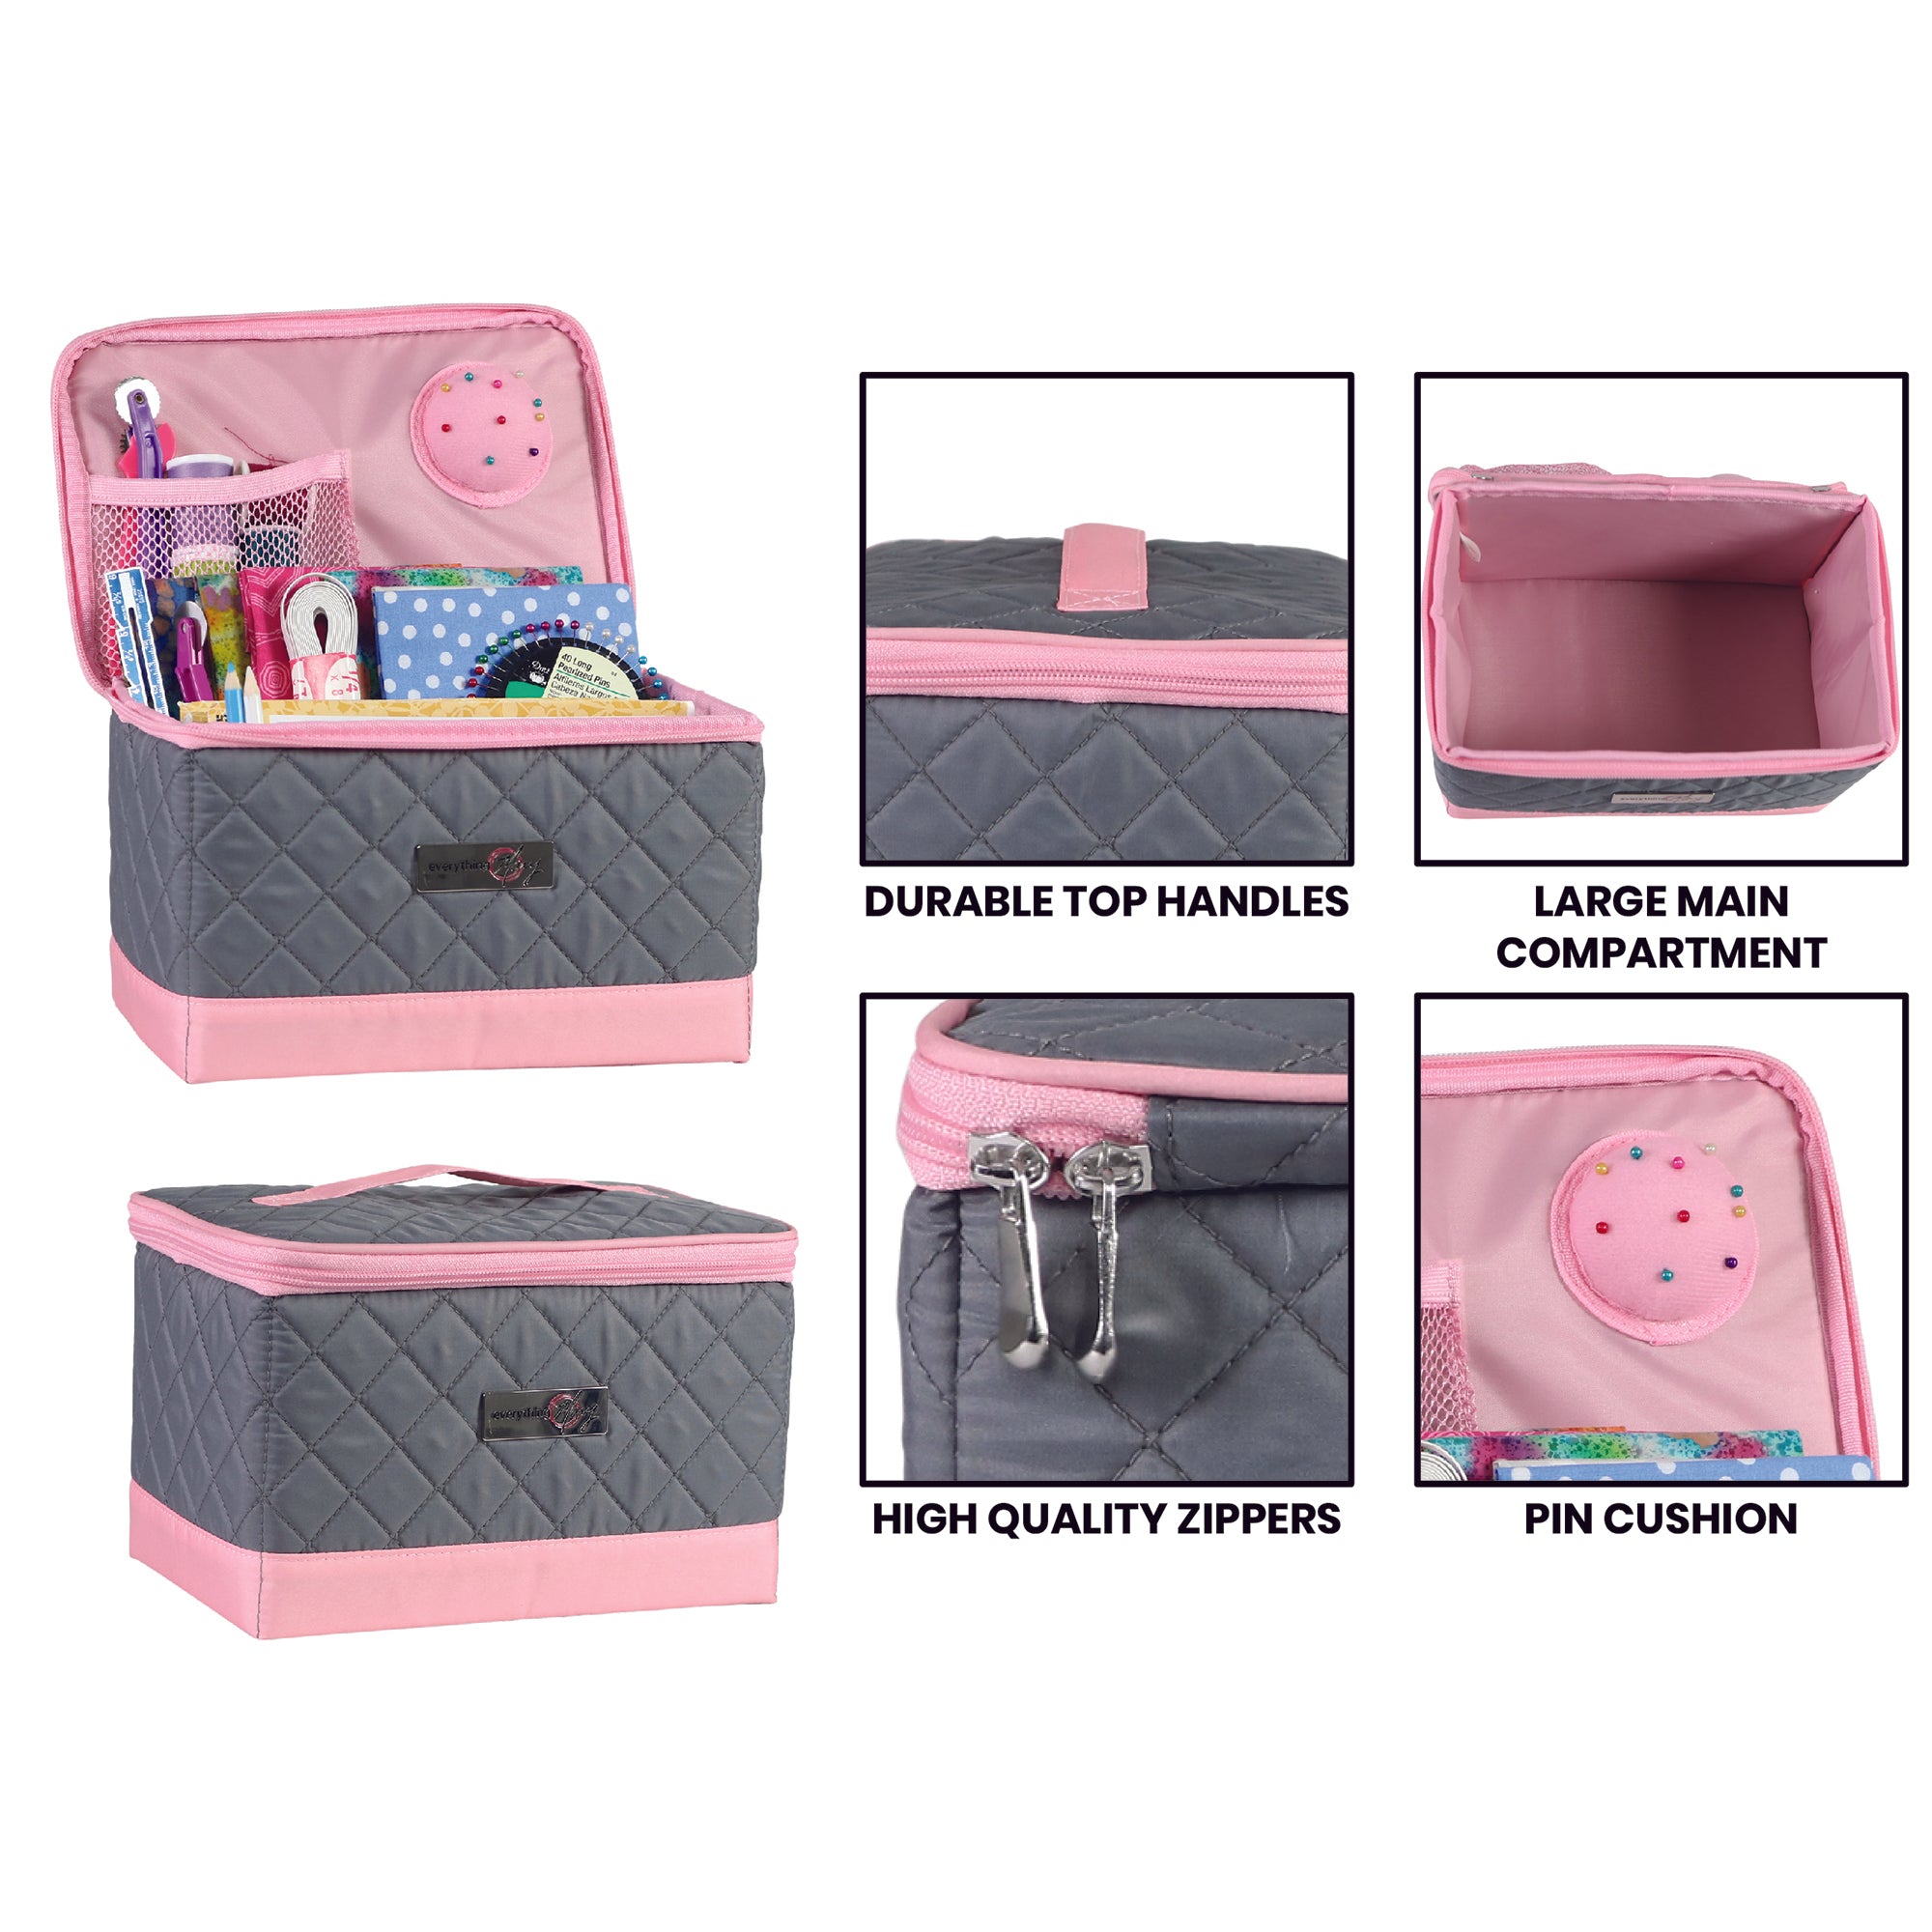 Collapsible Sewing Kit Organizer Box, Pink & Grey - Everything Mary